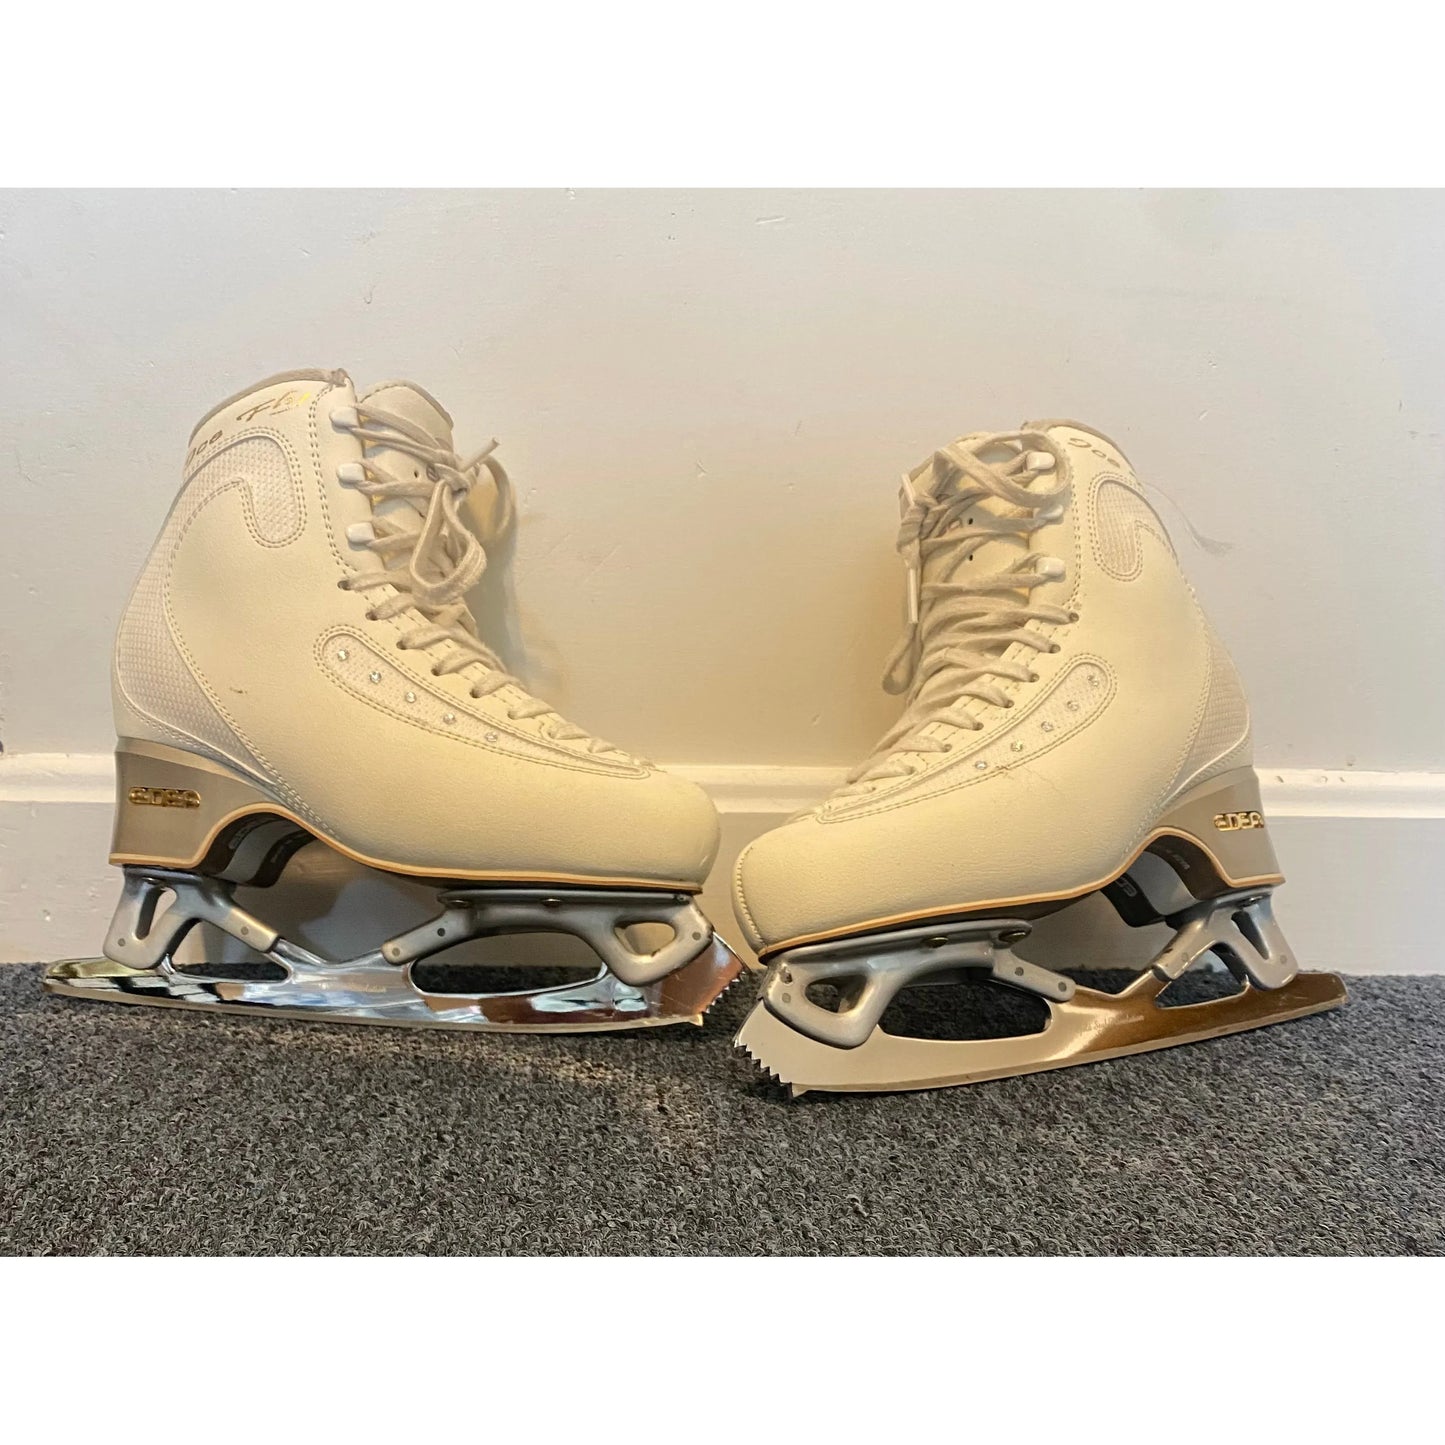 Used Edea Ice Fly Boot 230 B w/ Gold Seal Revolution Blade